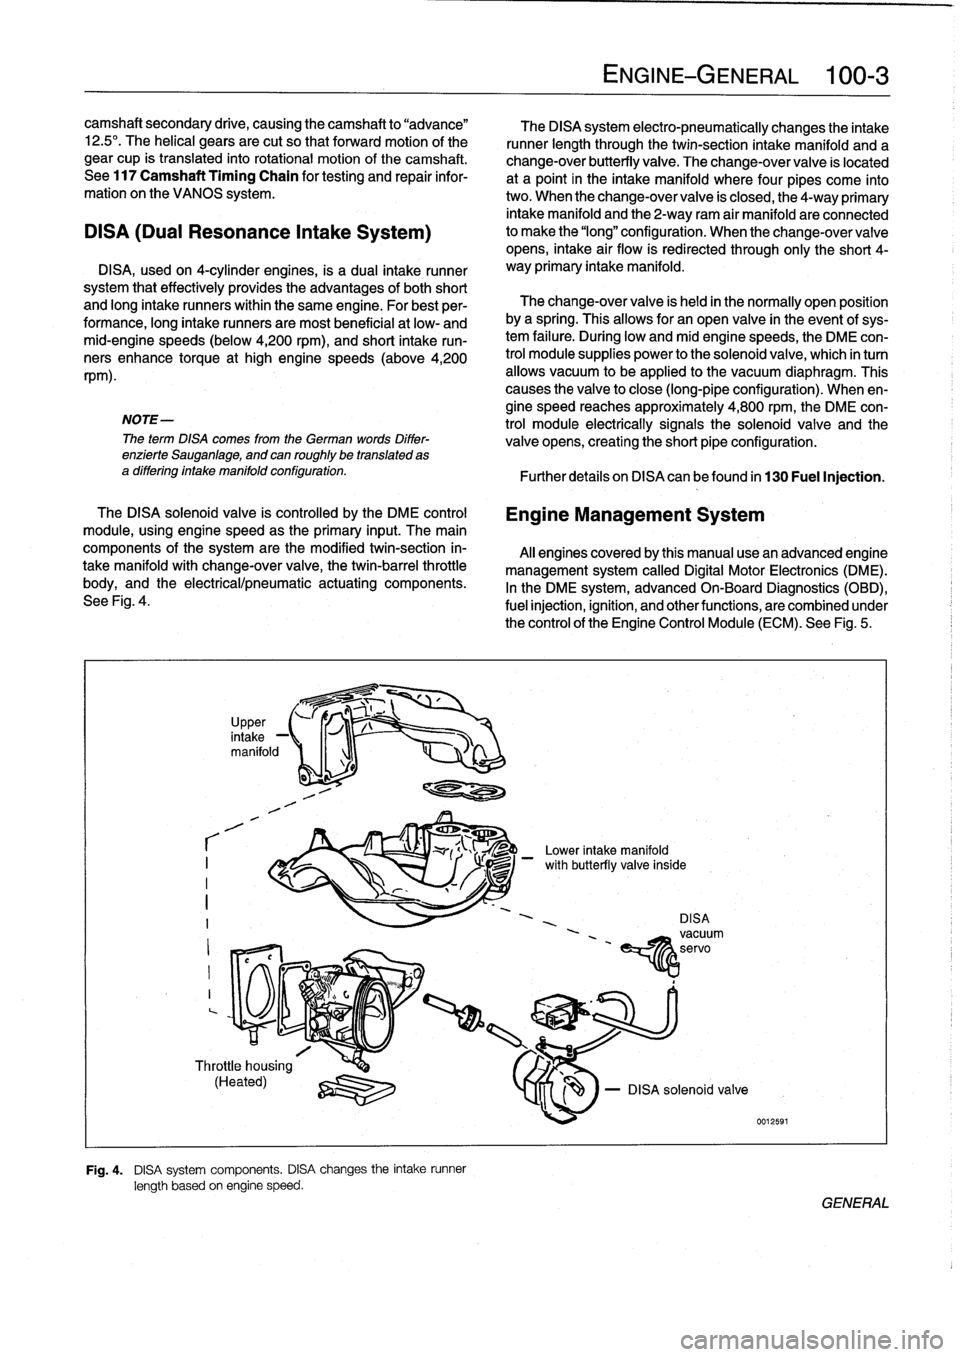 BMW 325i 1992 E36 Workshop Manual camshaft
secondary
drive,
causing
thecamshaft
to
"advance"

12
.5°
.
The
helical
gears
are
cut
so
that
forward
motion
of
the

gear
cup
is
transiated
into
rotational
motion
of
the
camshaft
.

See
117
